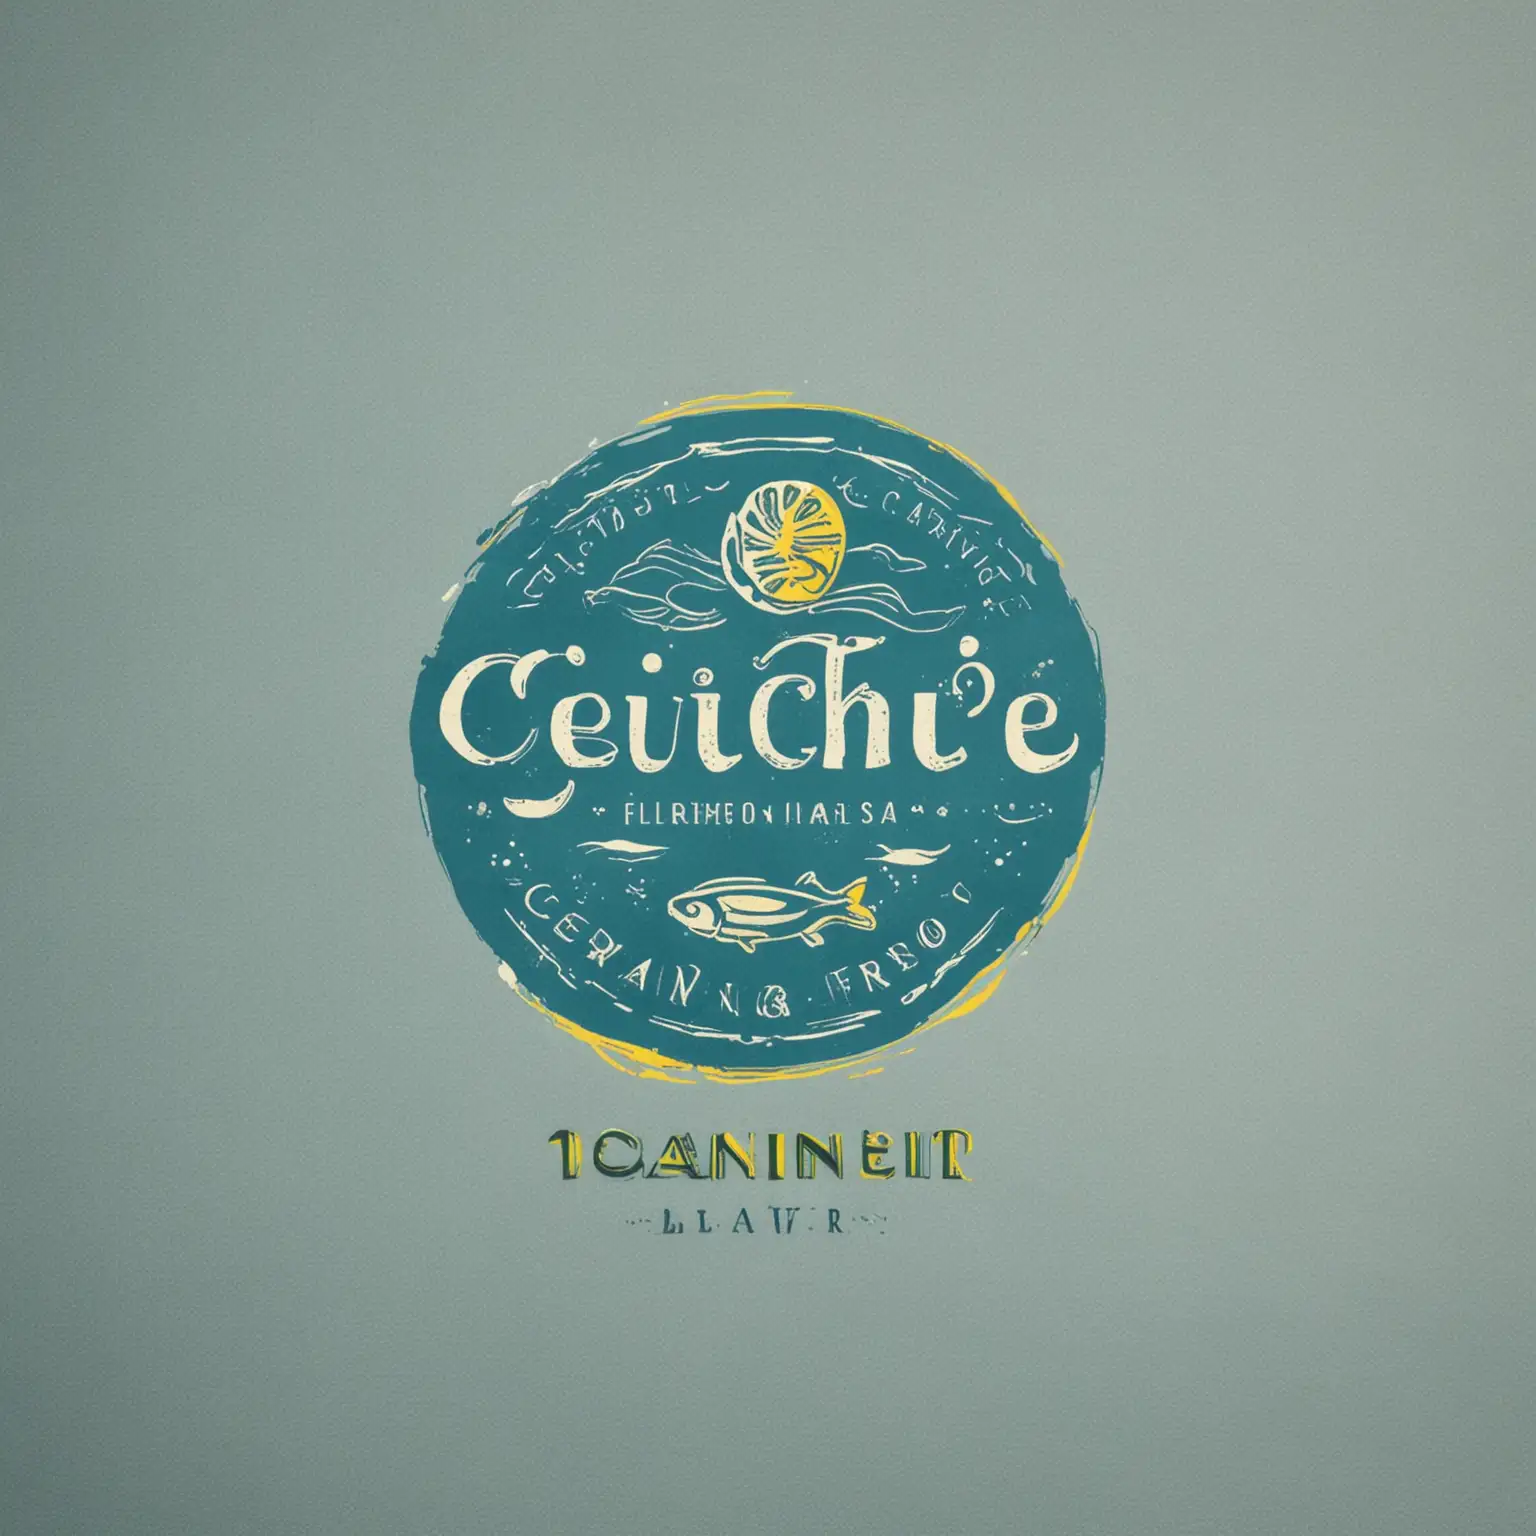 Design a logo for a ceviche seafood catering business. The logo should be simple, minimalist, and attractive. Incorporate elements of seafood, such as fish, shrimp, or citrus slices. The color palette should include shades of blue to represent the ocean, with hints of yellow or green to suggest freshness and citrus. Ensure the overall design is elegant and professional, suitable for a catering business